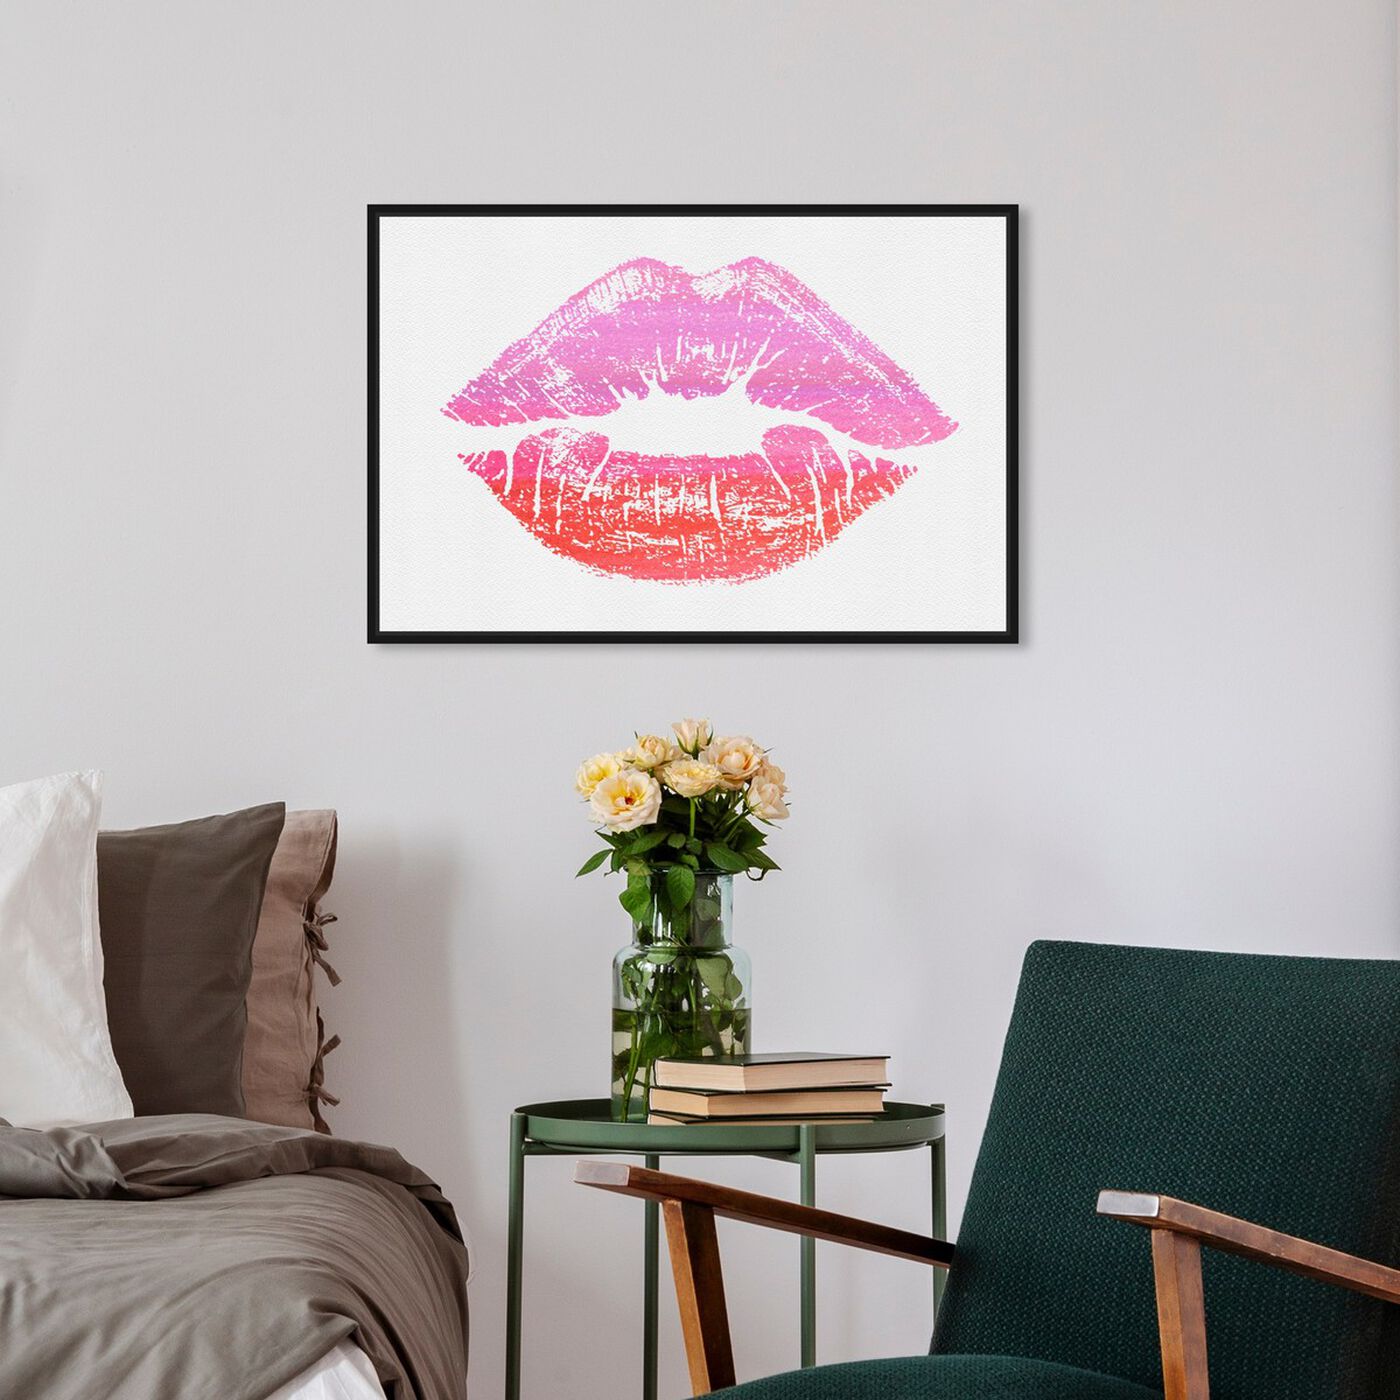 Hanging view of Berry Kissable featuring fashion and glam and lips art.